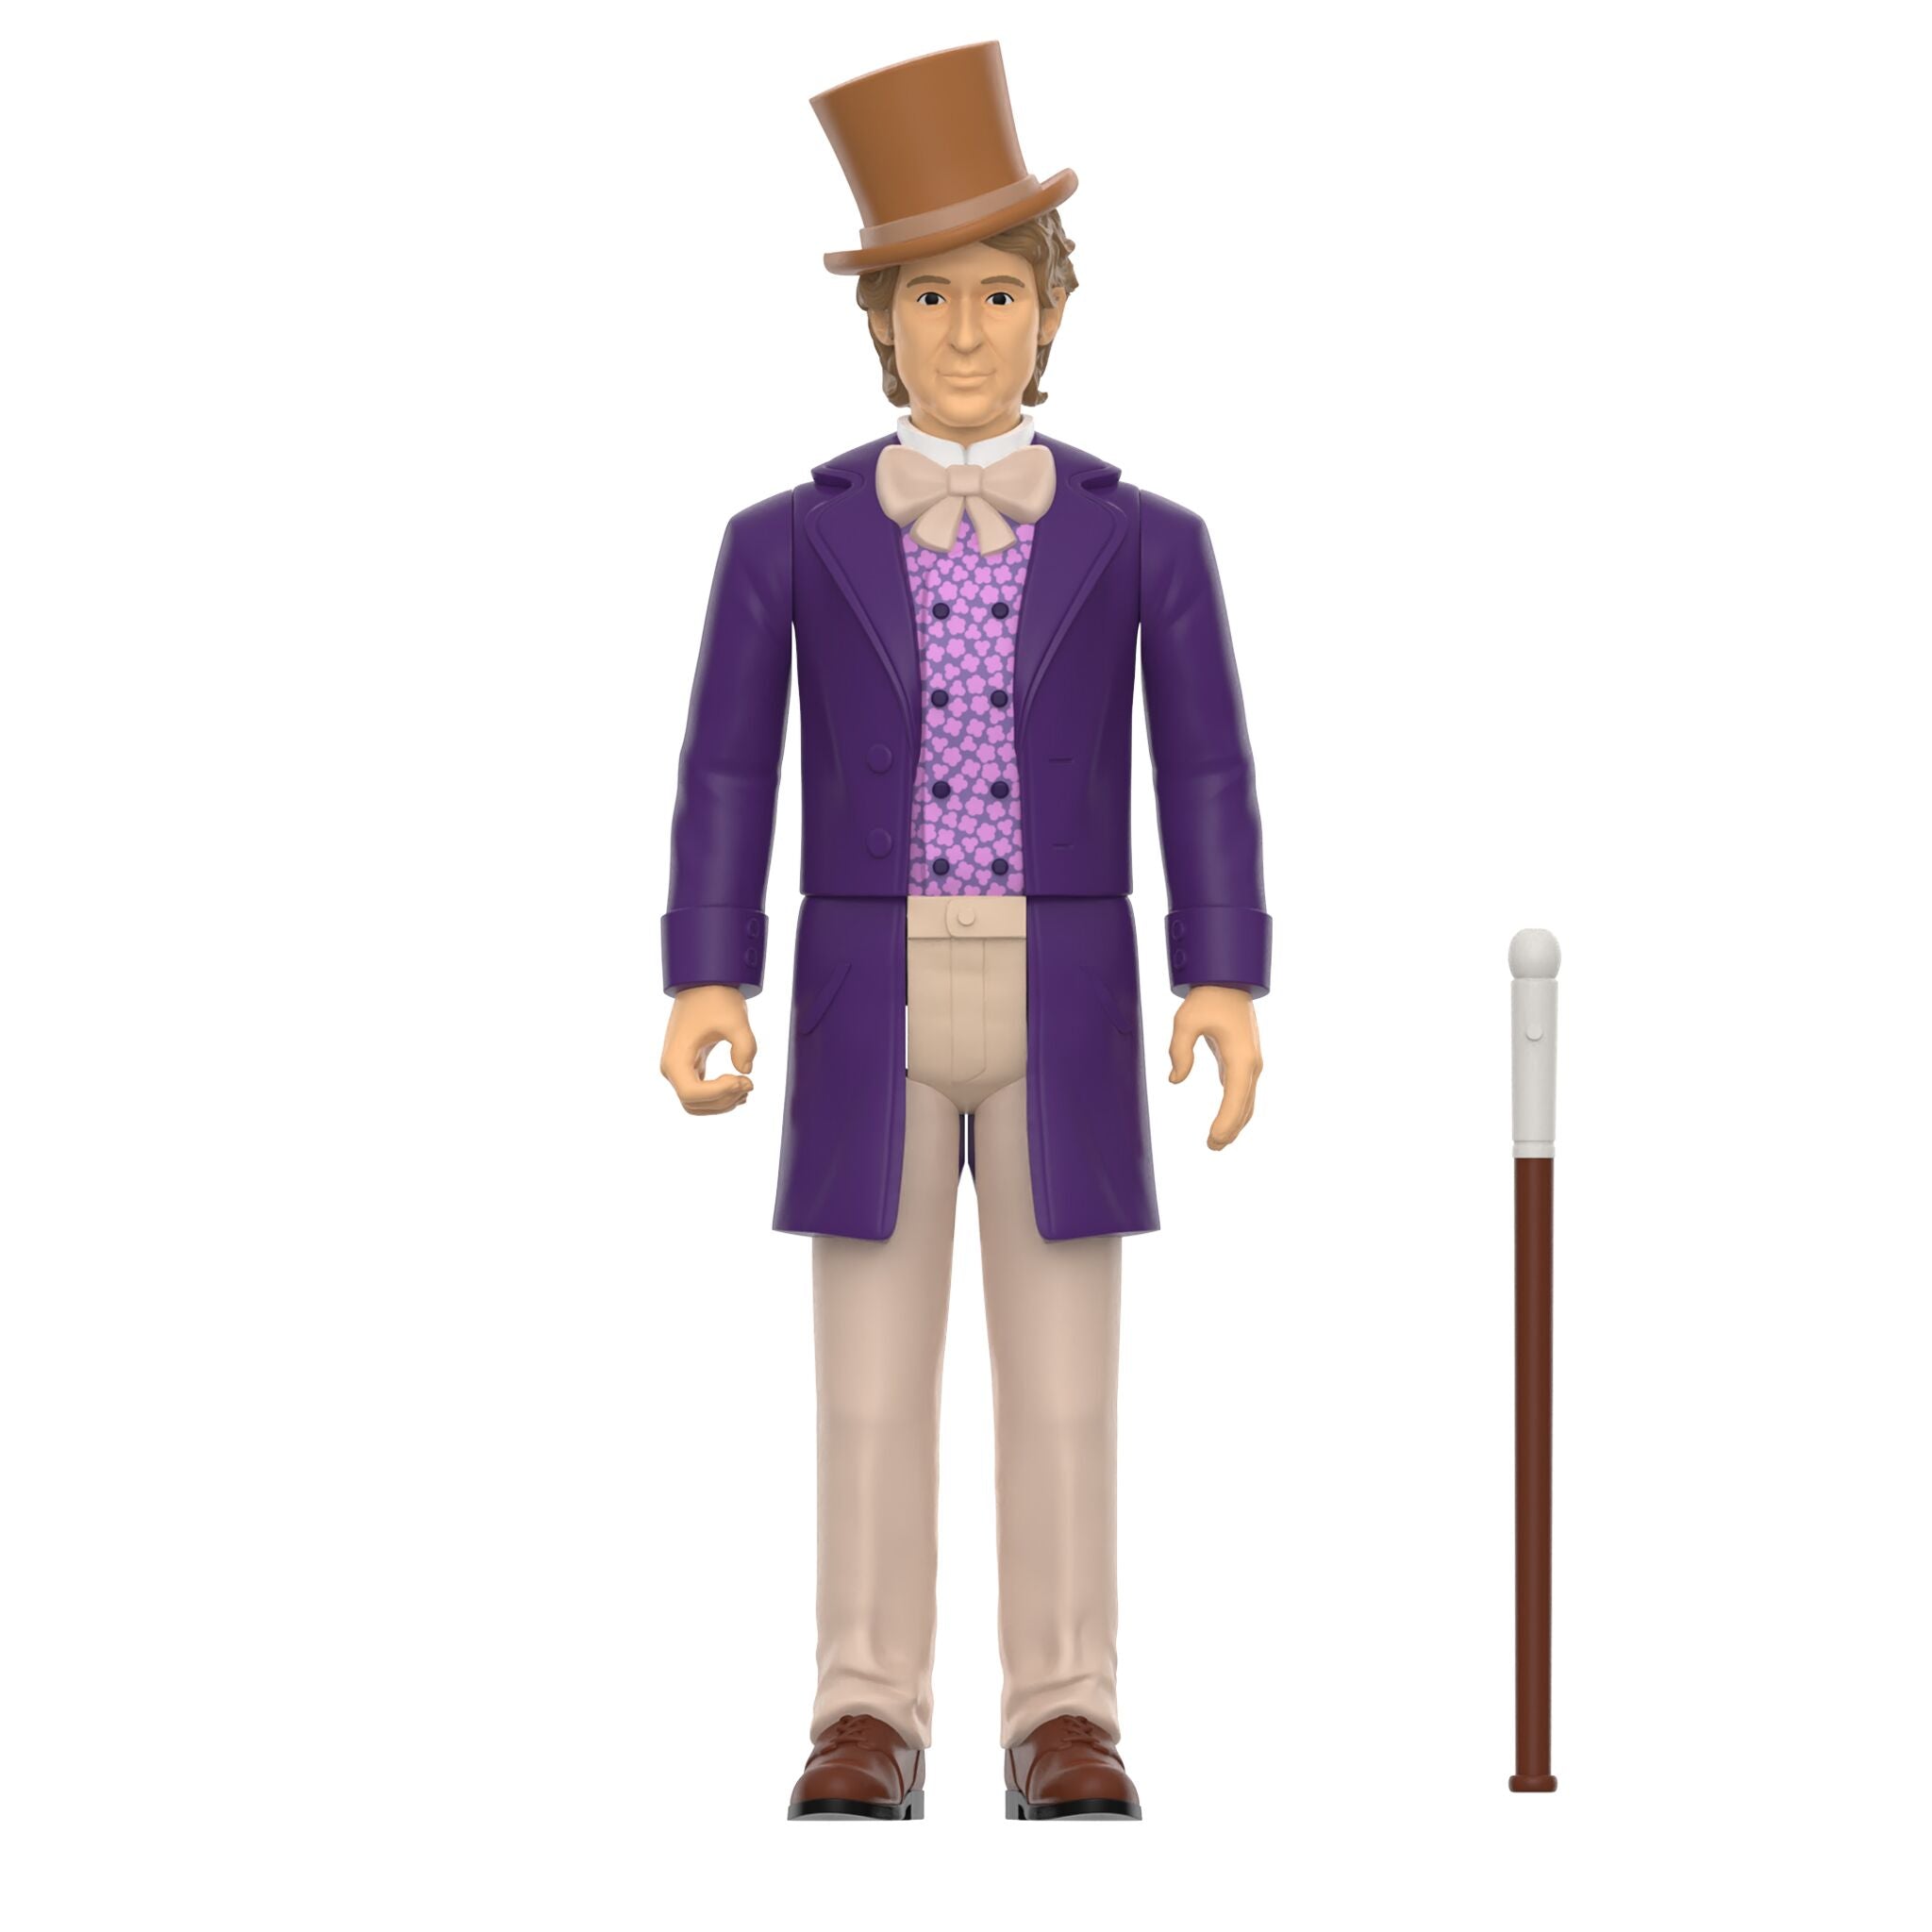 Willy Wonka & the Chocolate Factory ReAction Figures Wave 01 - Willy Wonka